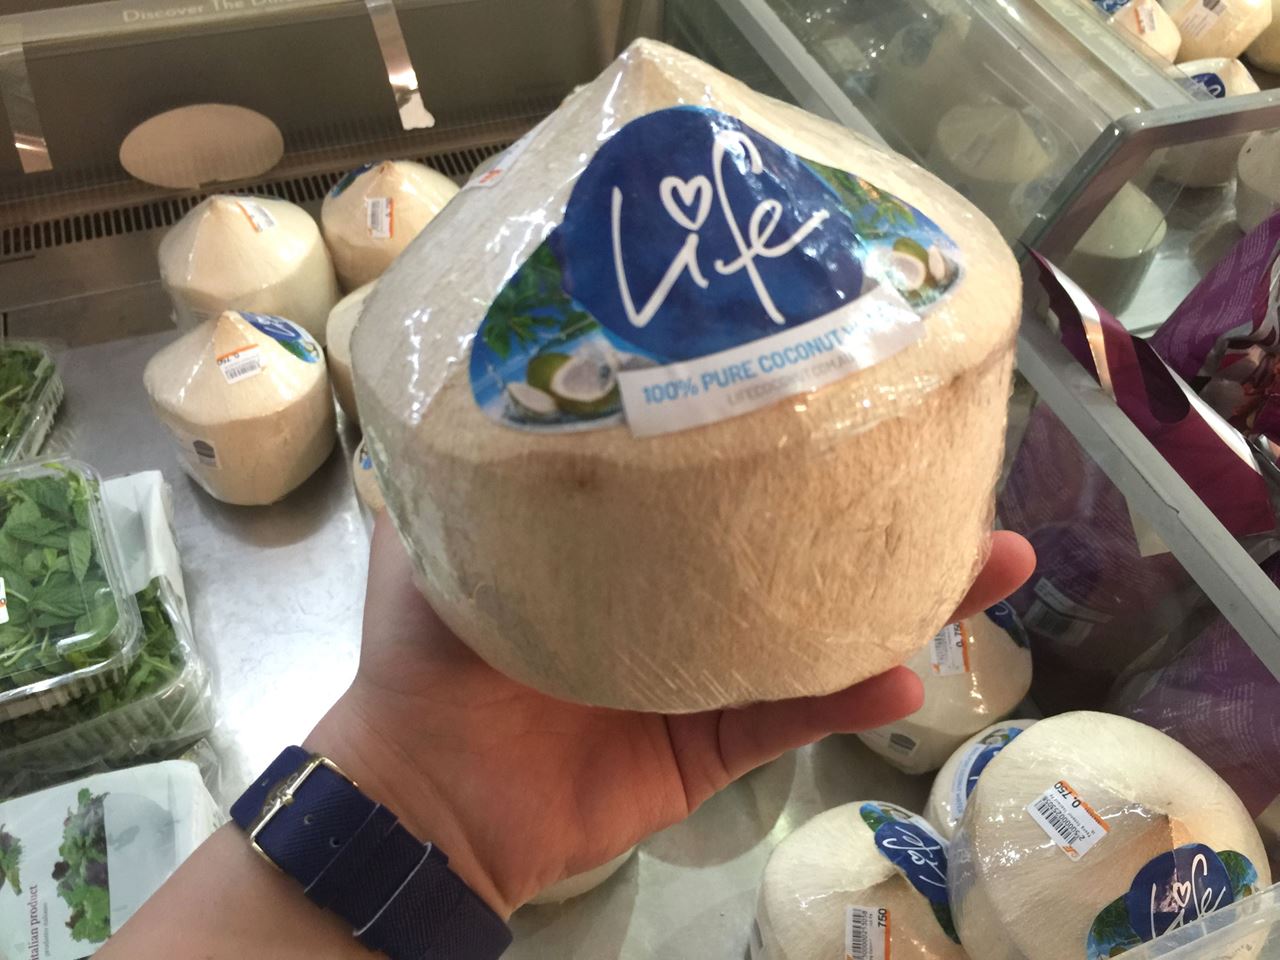 This coconut is a product of Thailand